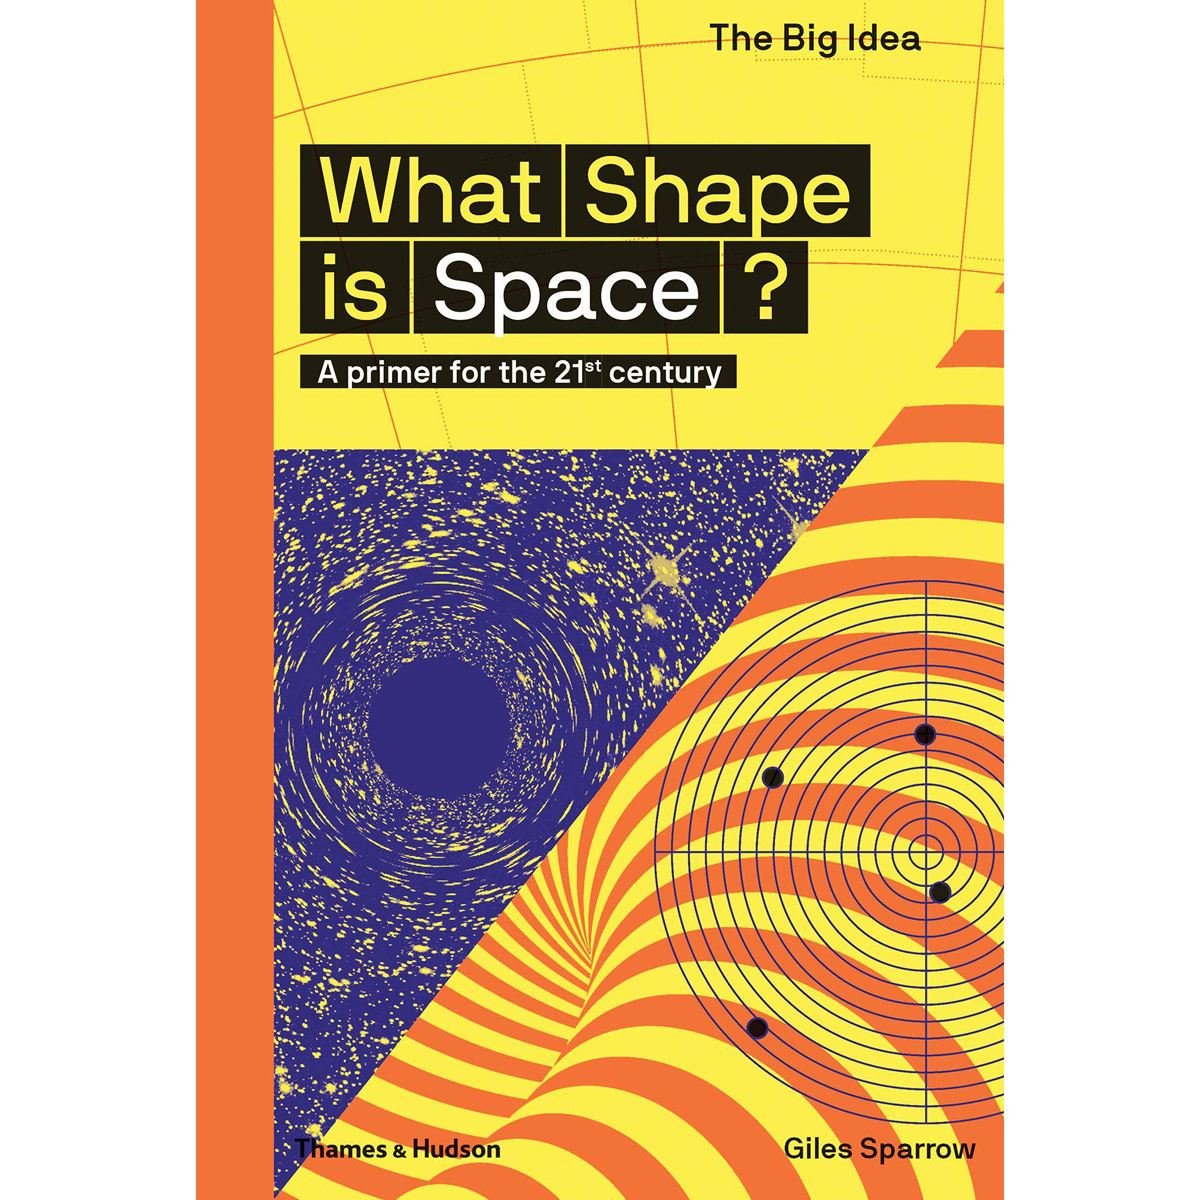 What shape is space?